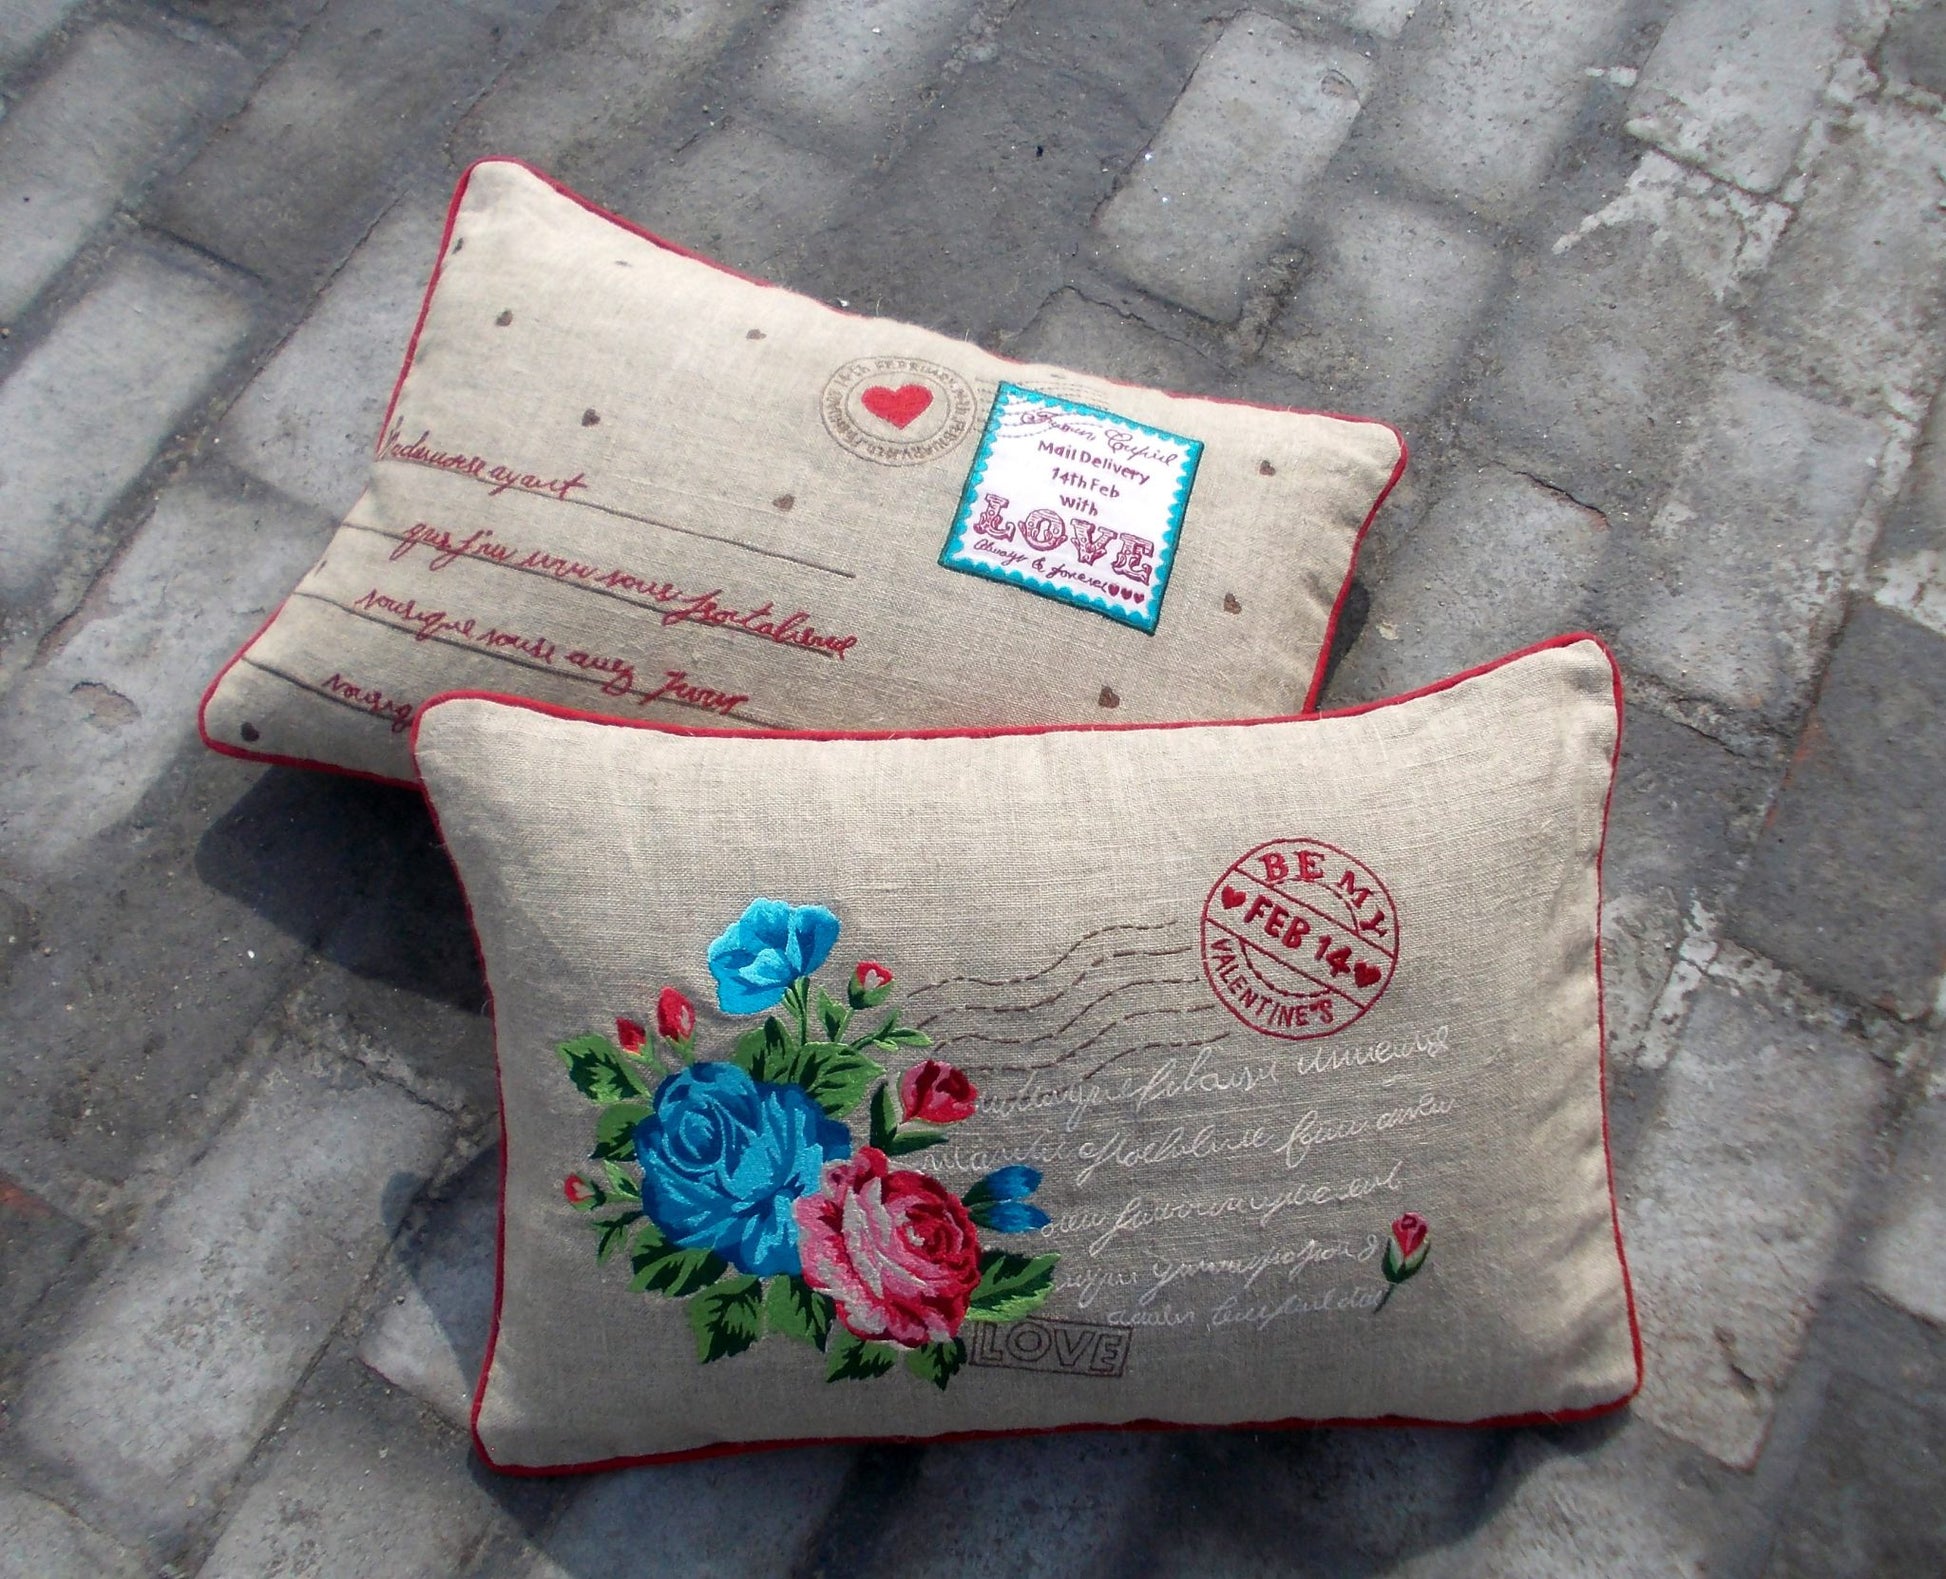 Valentine pillow cover, rose bunch, linen with coral and turquoise combination, postcard style